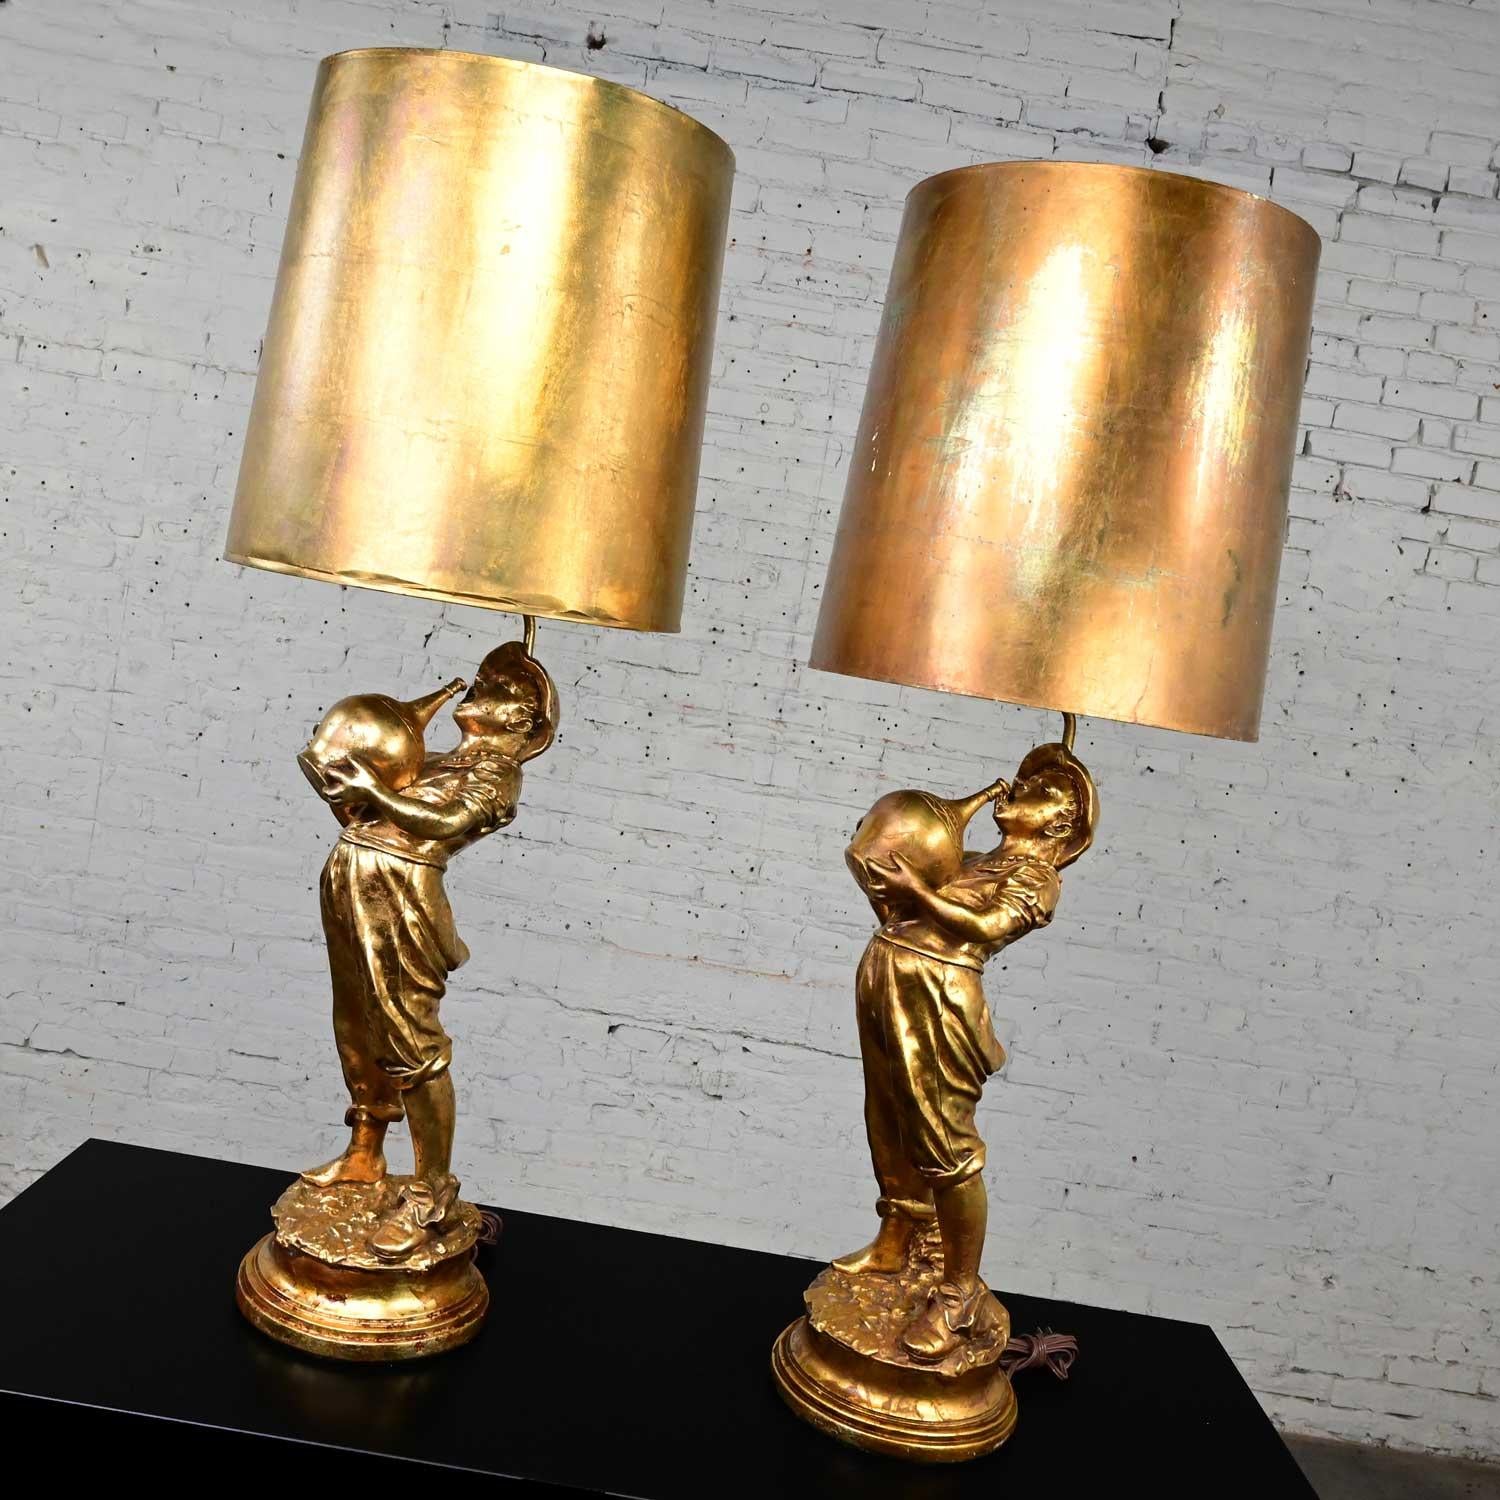 Fabulous pair of midcentury Hollywood Regency hand gilded gold plaster large scale figural lamps boy with drinking jug and original slightly tapered gold leafed or gilded drum shades in the style of Marbro Lamp Company. Beautiful condition, keeping